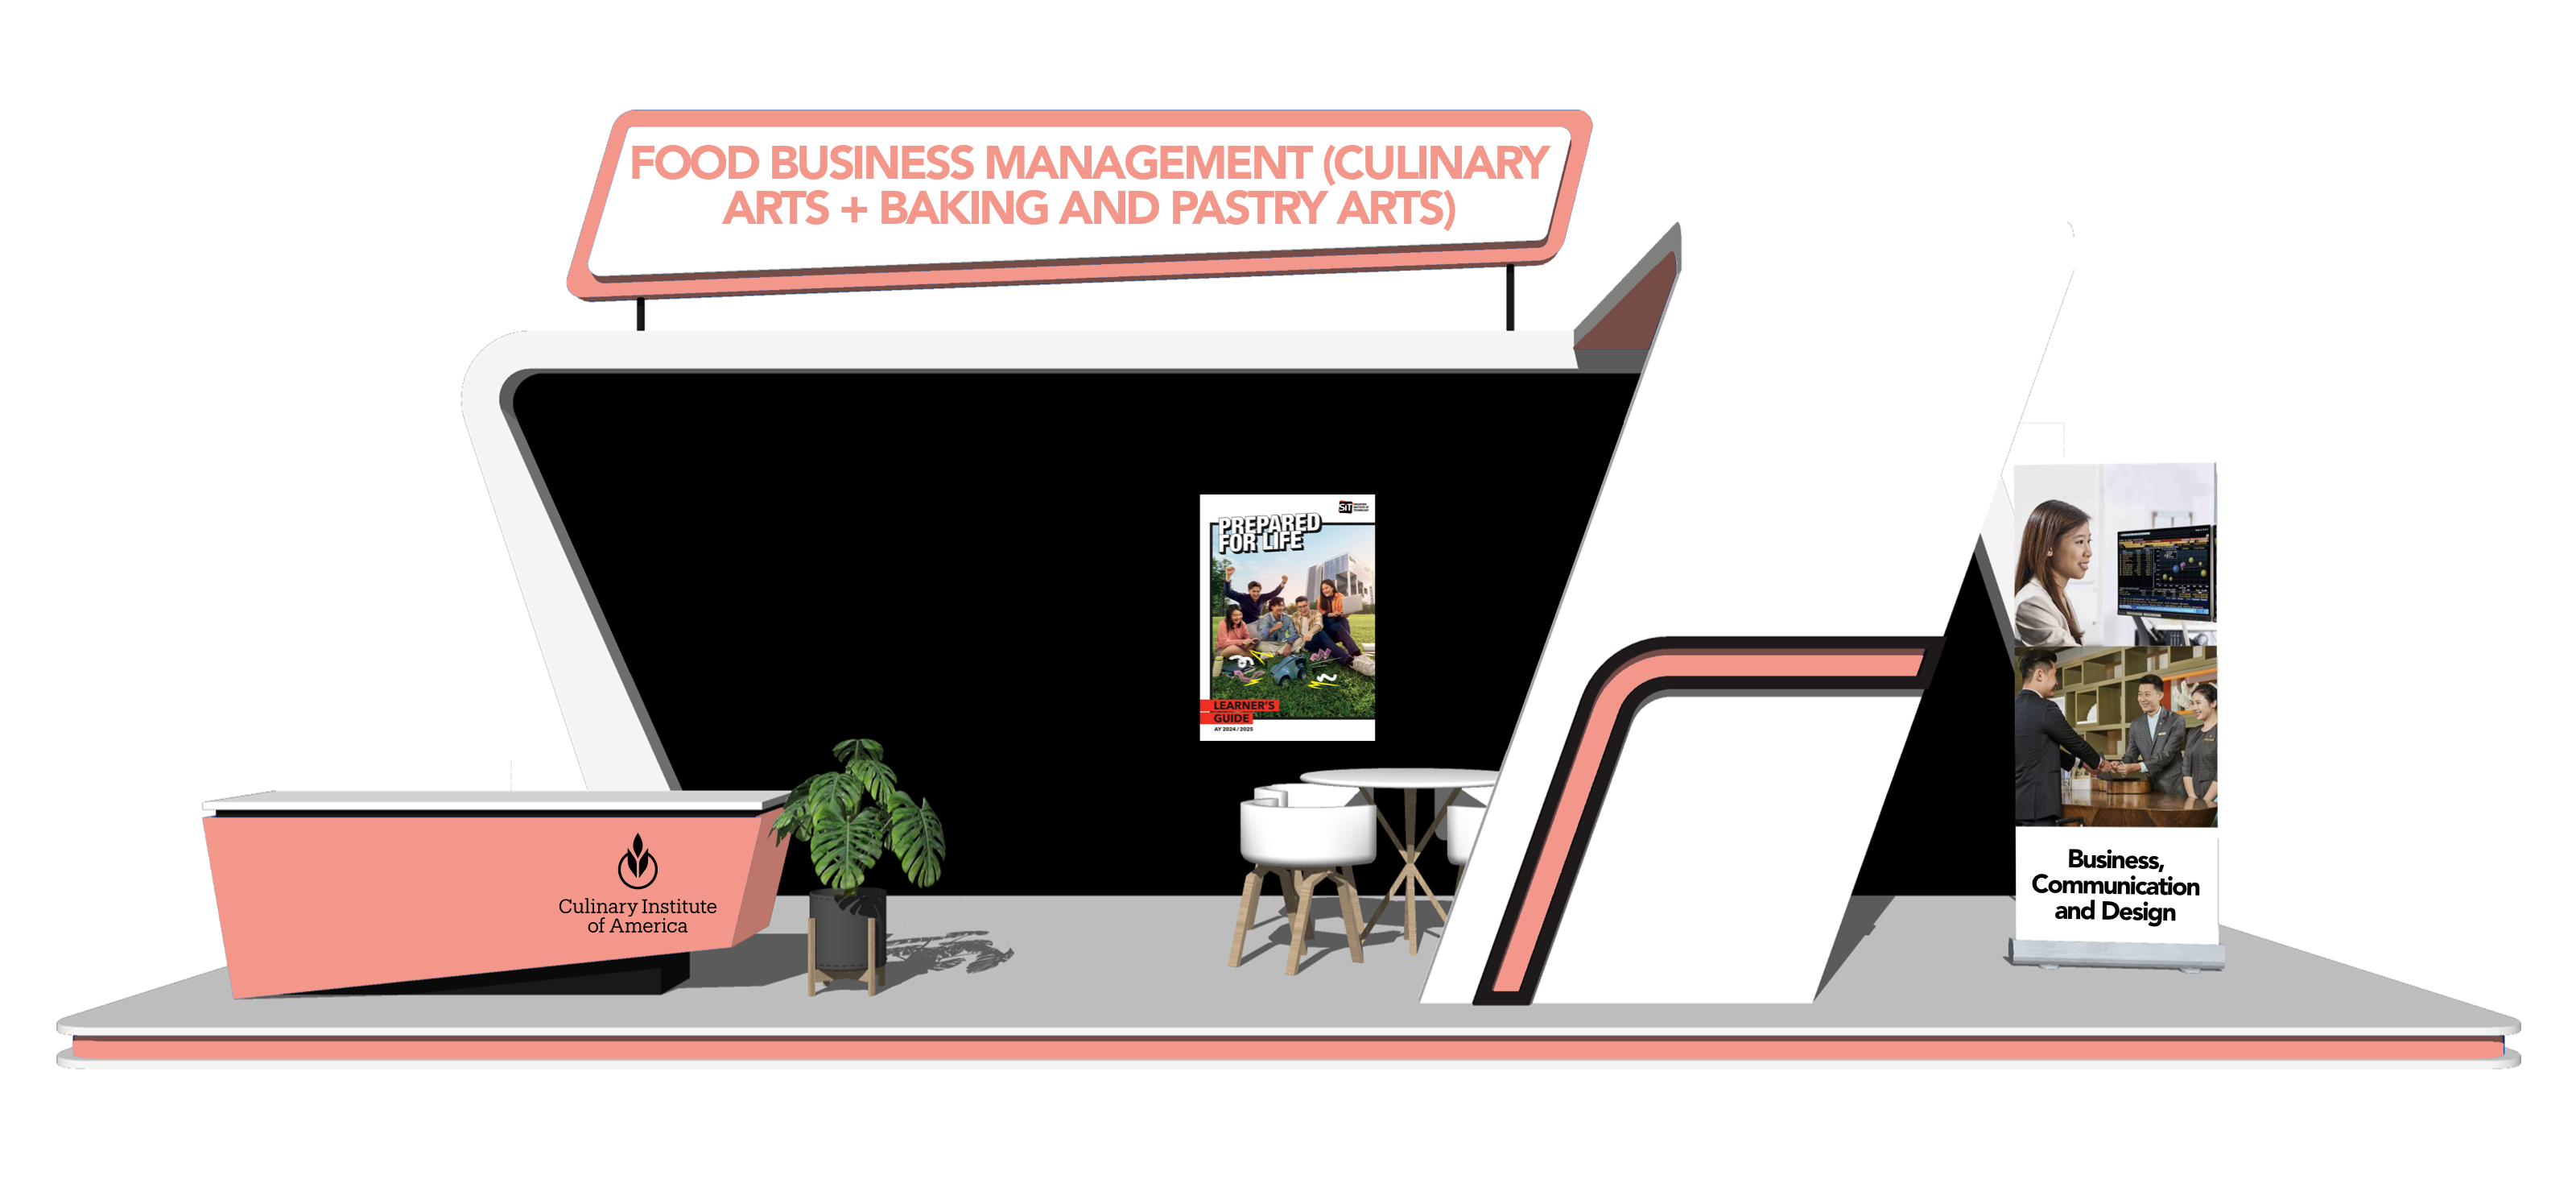 Food Business Management (Culinary Arts + Baking and Pastry Arts) (The Culinary Institute of America)